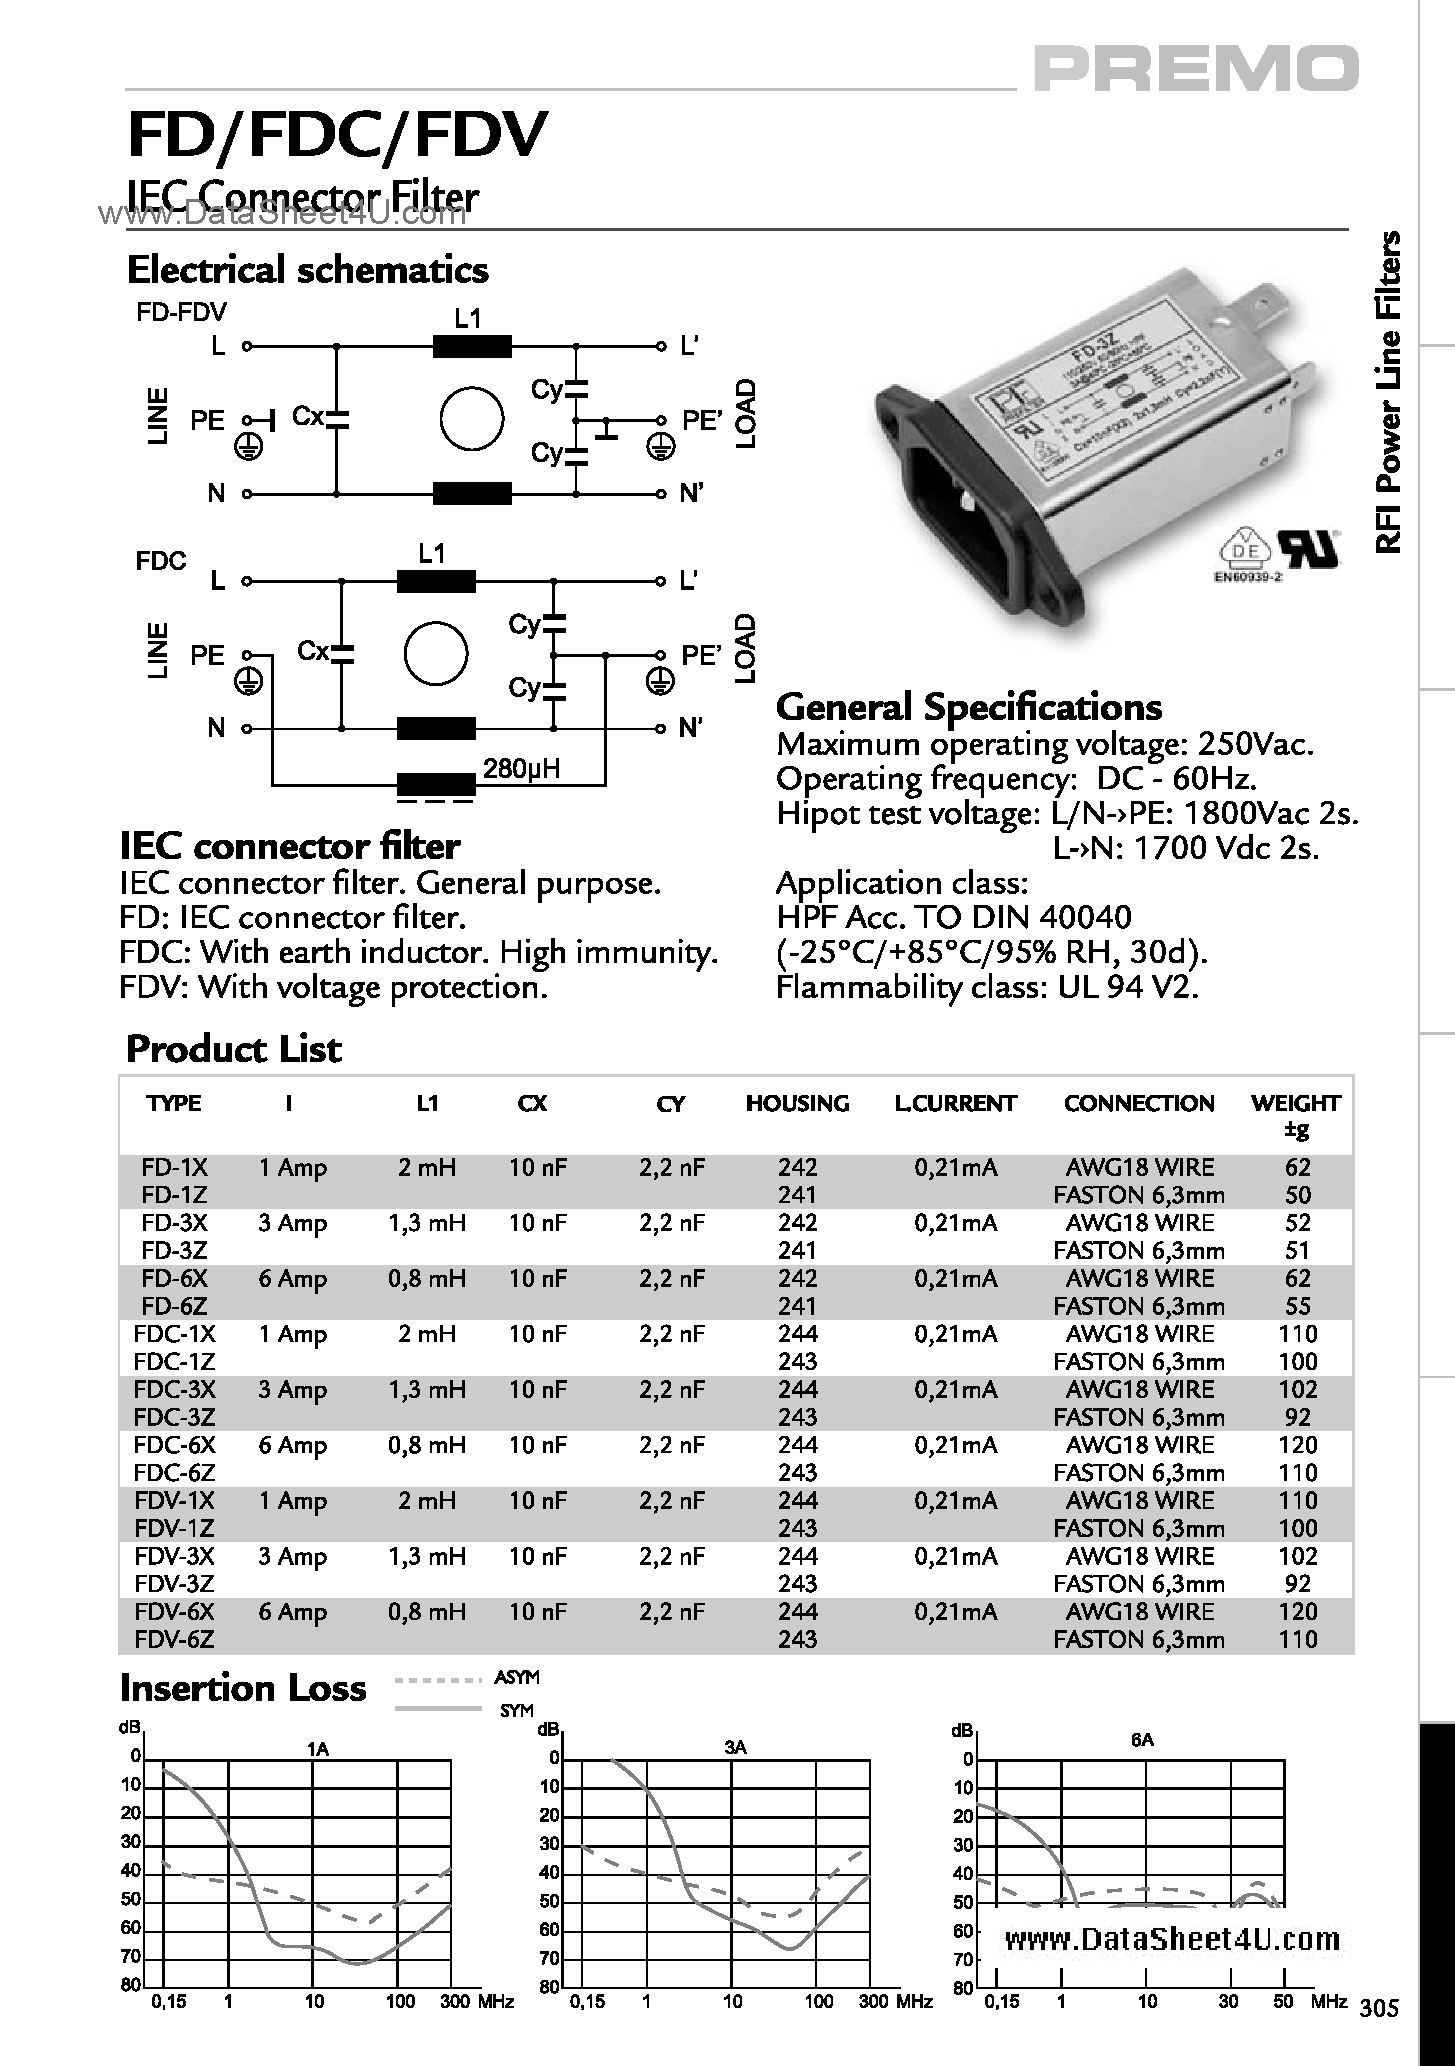 Datasheet FDV-xx - EMC Filters - Single-Phase Filters - FD/FDC/FDV IEC Connector Filter page 1